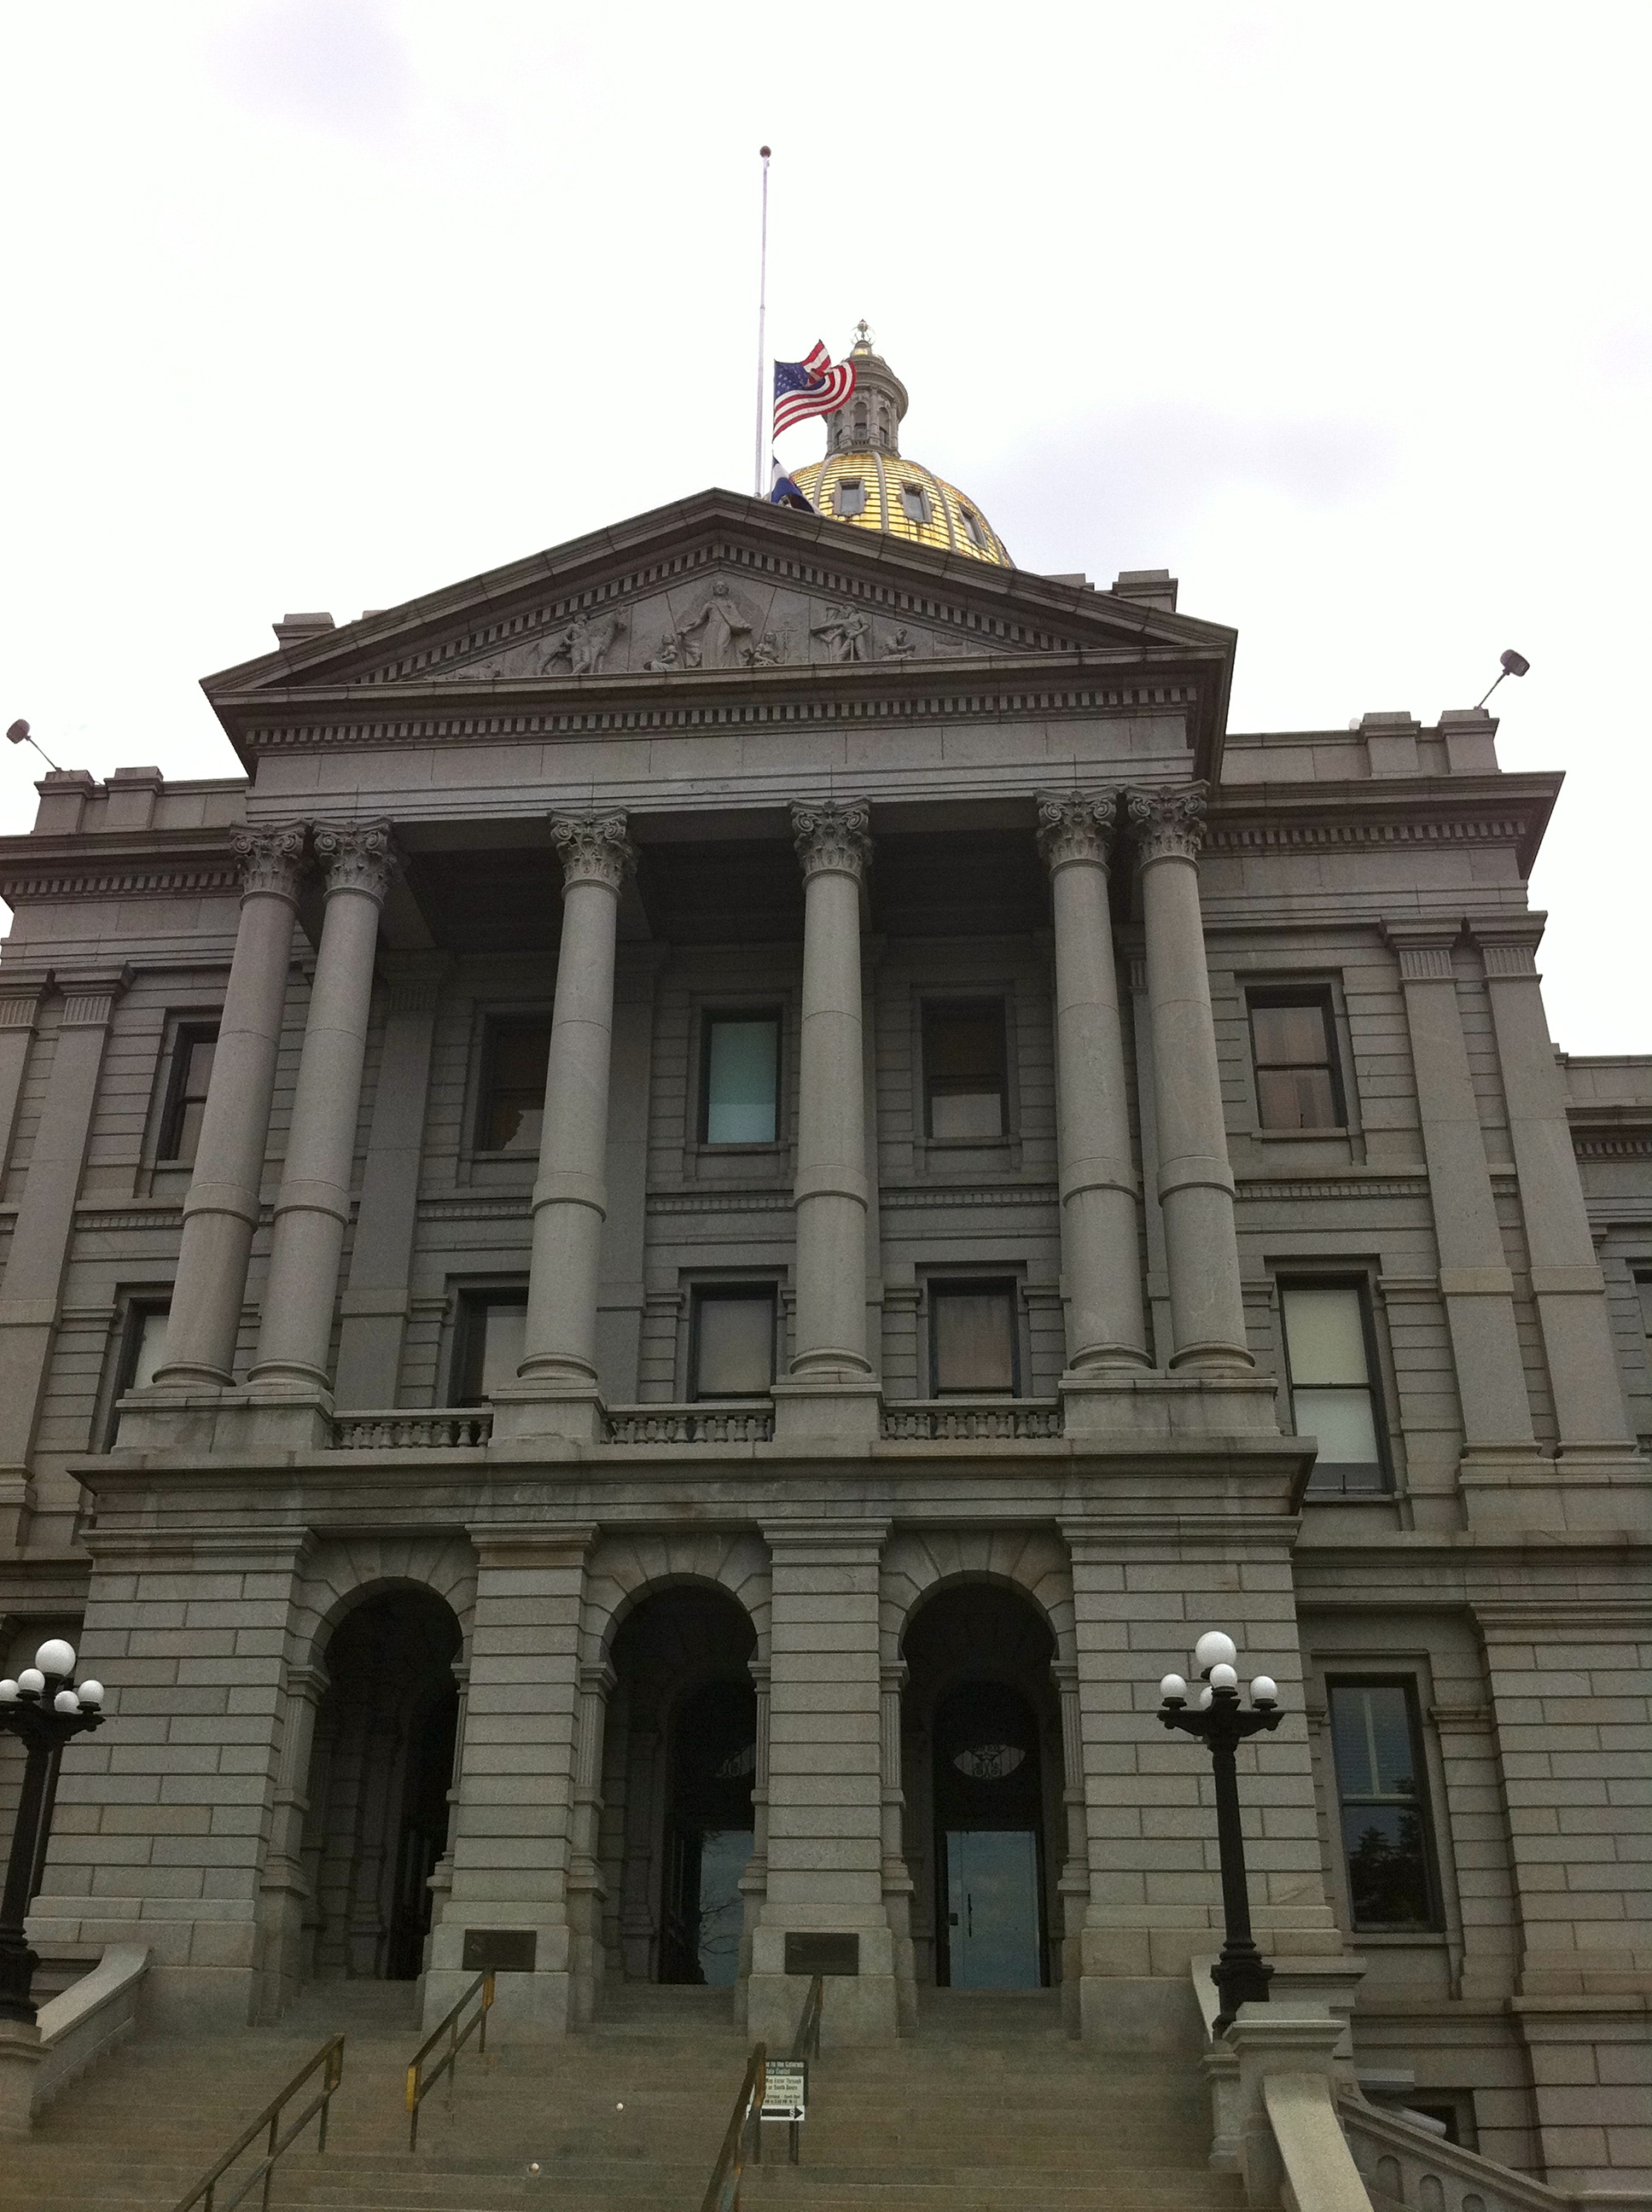 The Colorado State Capitol Building in Denver. The building is exactly 1 mile above sea level.